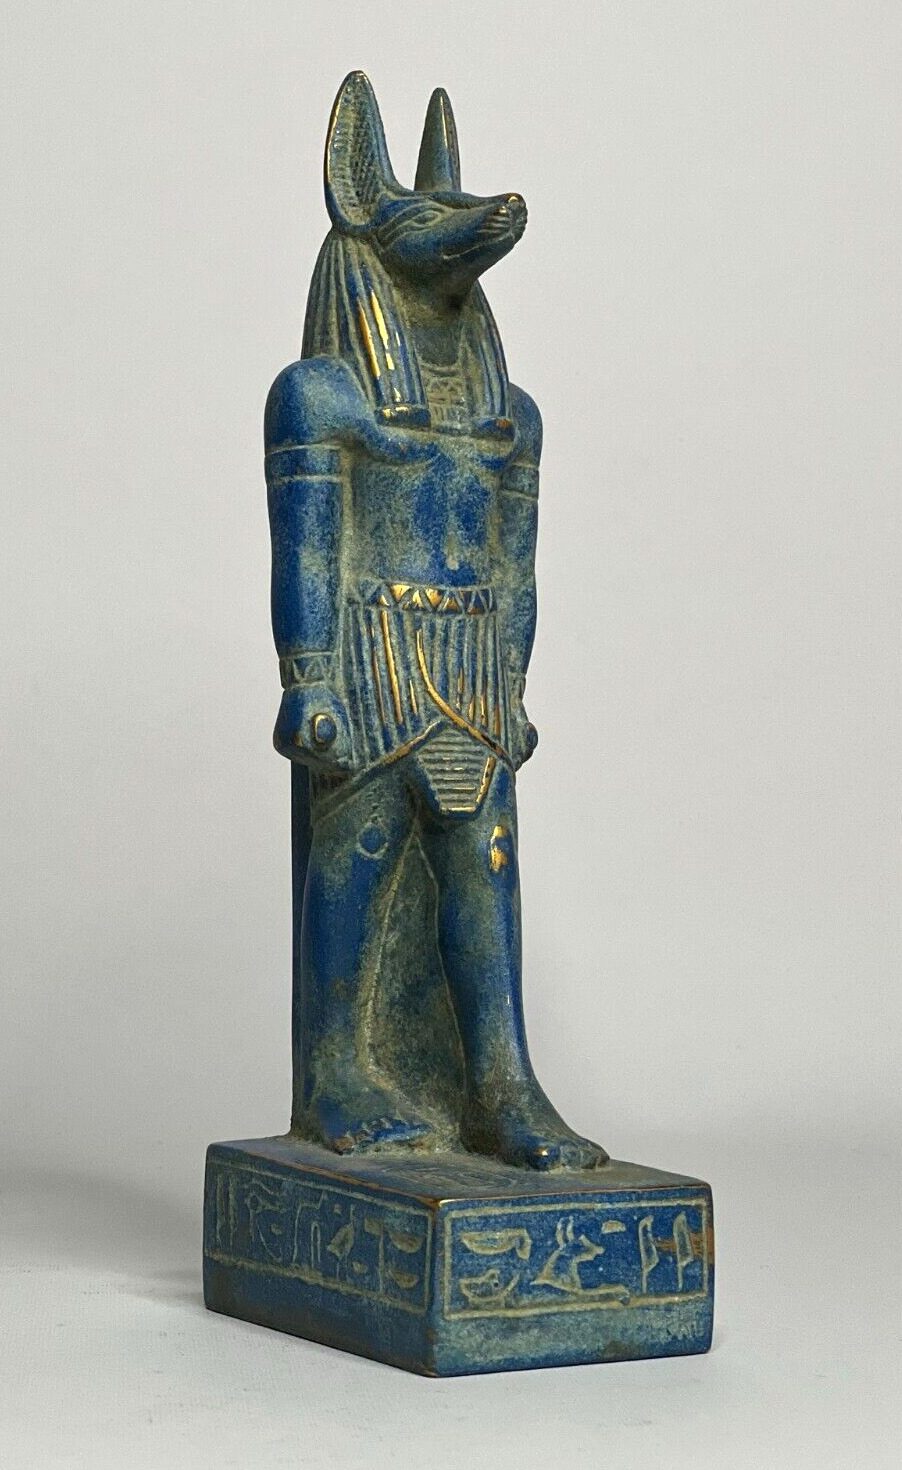 Anubis Statue Egyptian Antiques God of Death Egypt Pharaonic Carved Blue Stone